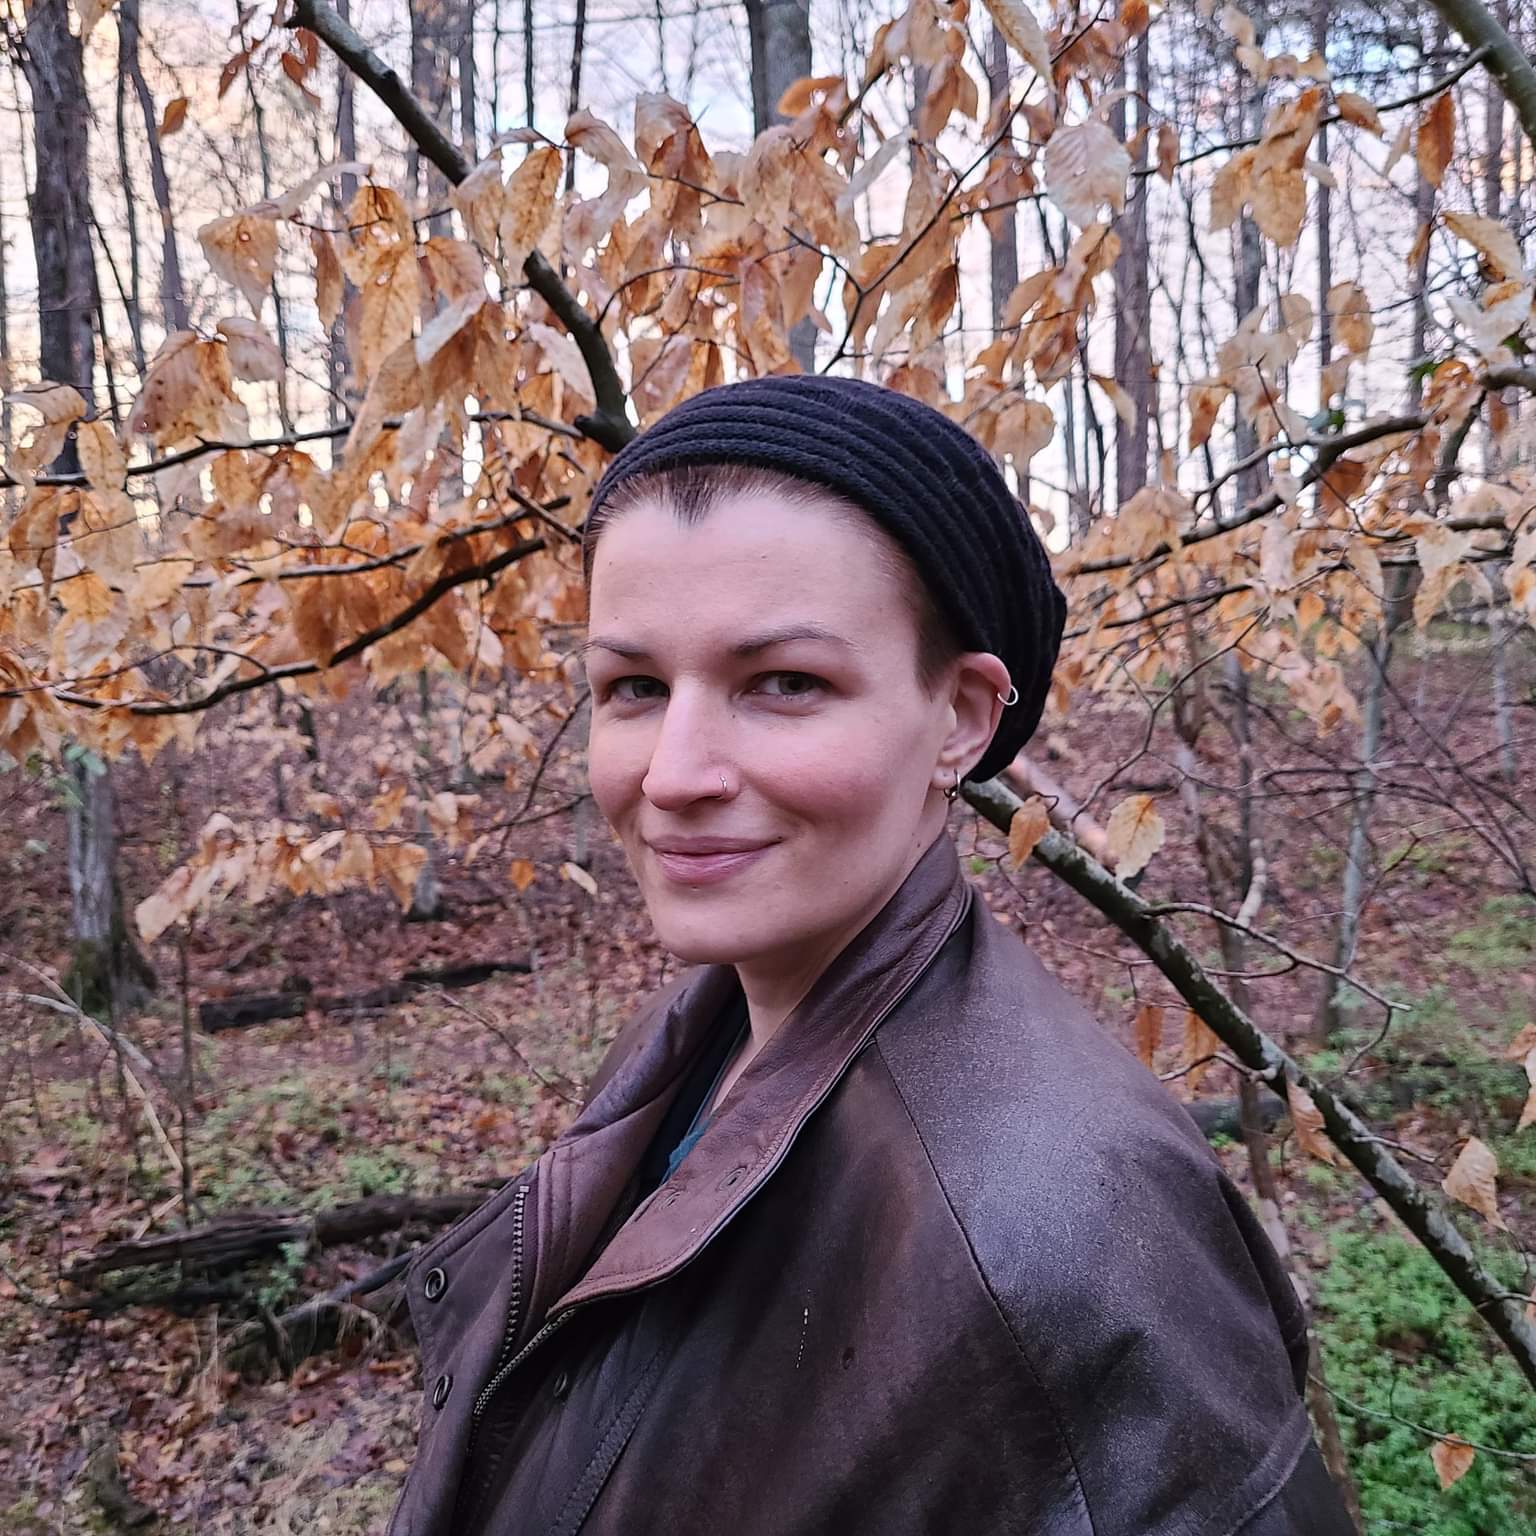 J. in a forest.